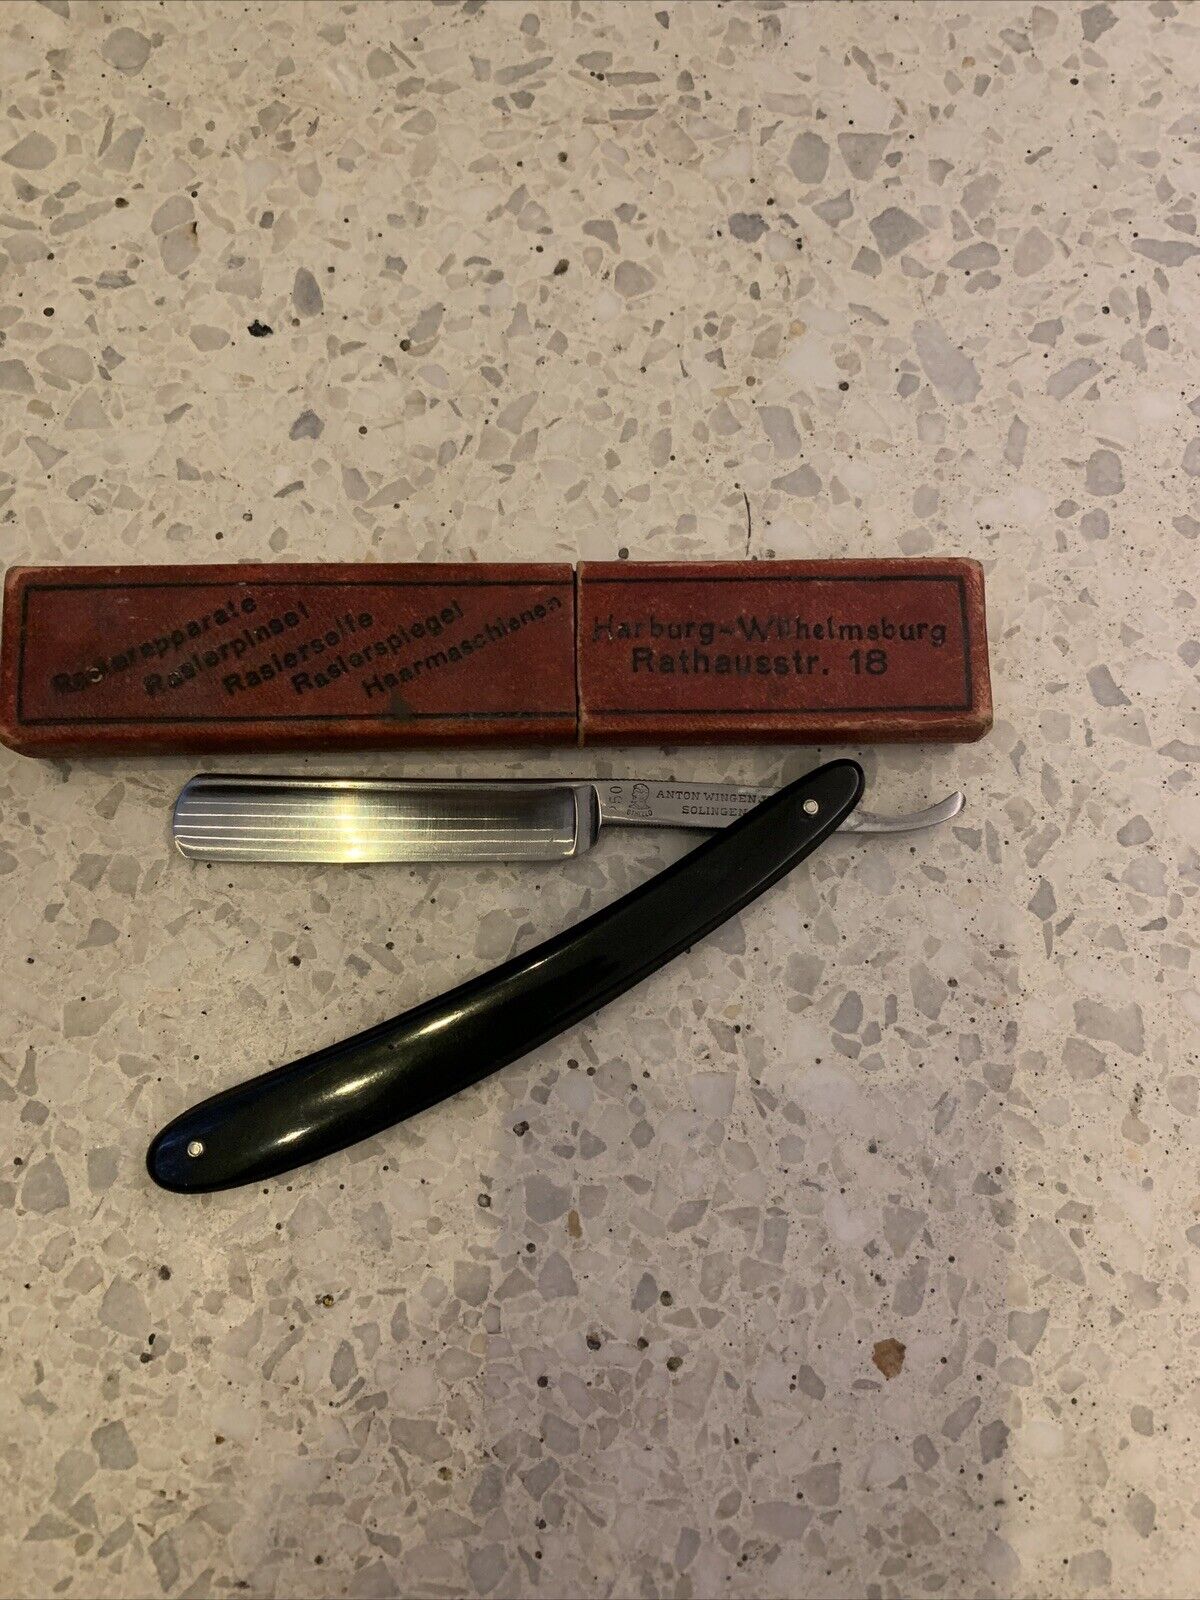 Razor Honing And Restoration. Re-scaling And Re-pinning And Custom Scales.